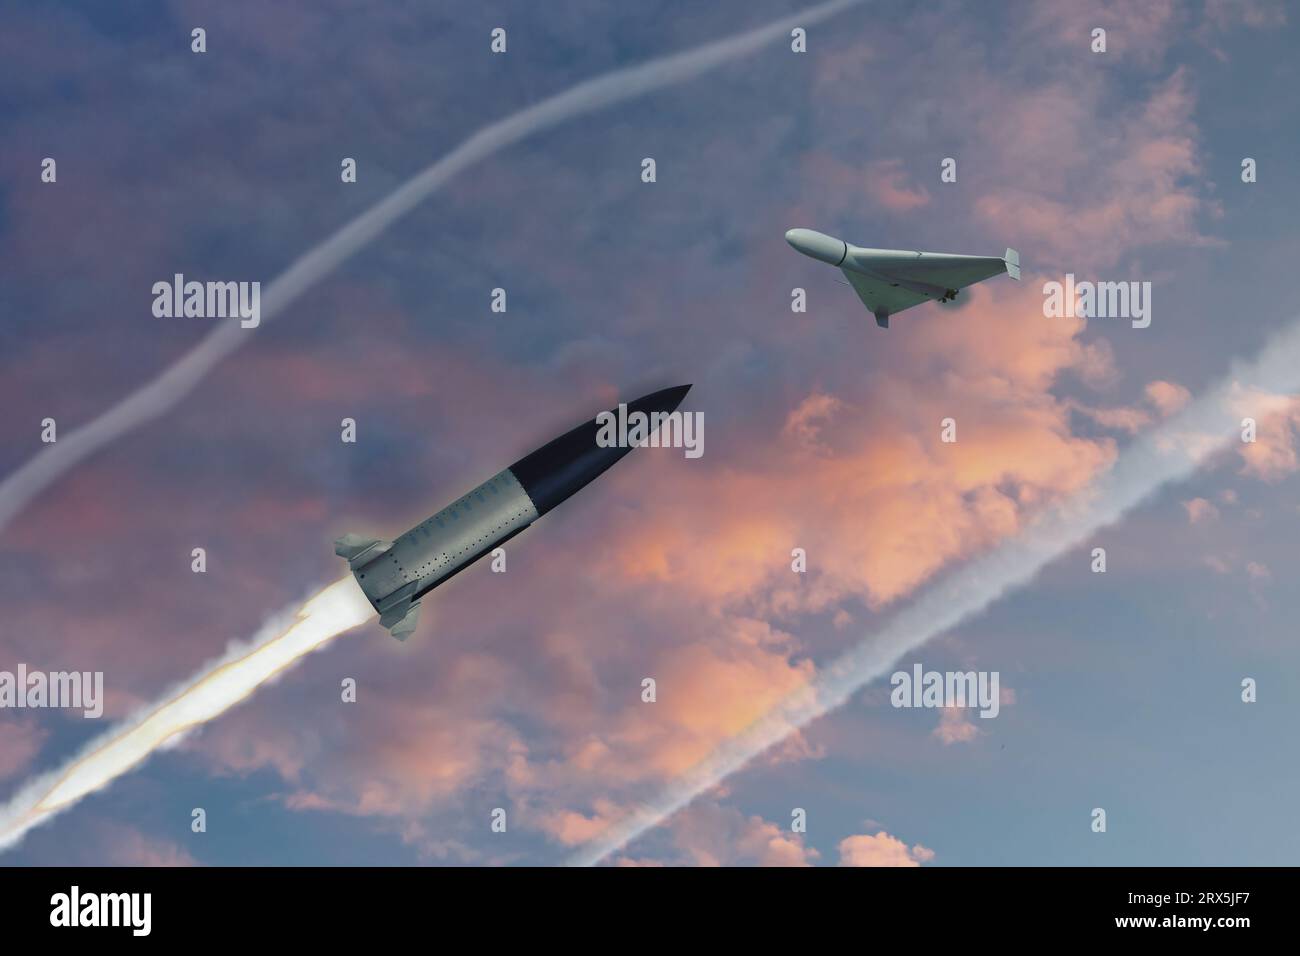 Anti-air missile shoots down drone in evening sky, missile launch trail, 3d rendering. Concept: war in Ukraine, Russian drone attack, anti-aircraft de Stock Photo